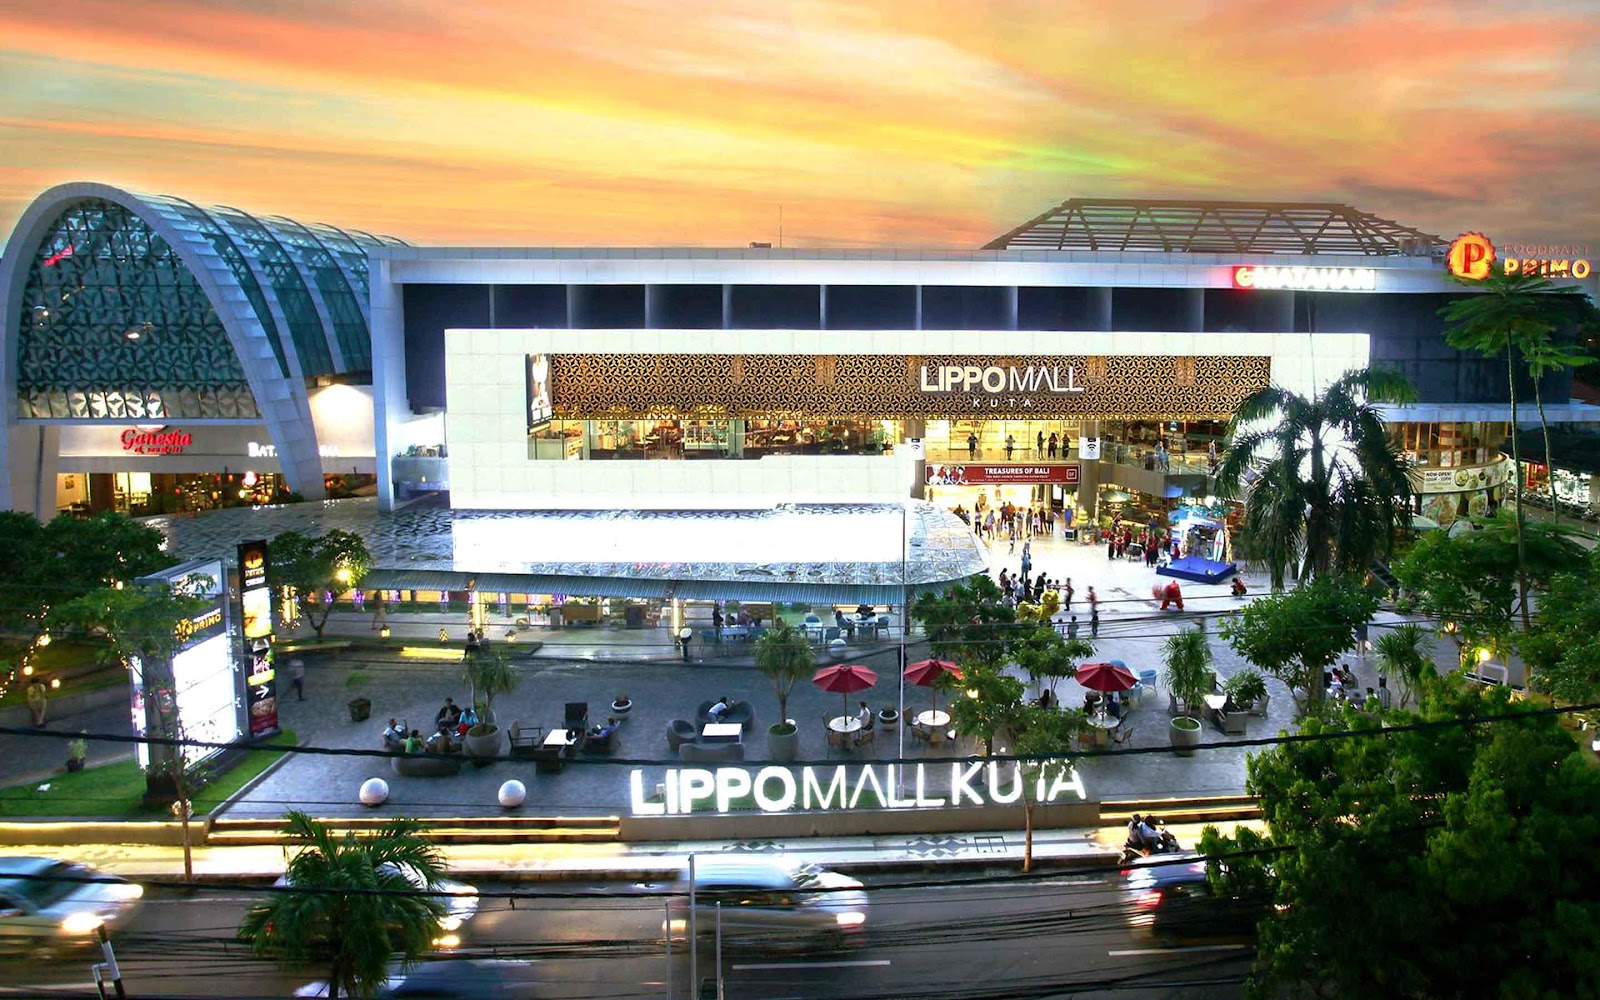 Lippo Mall Kuta - Malls in Bali: From Seaside to Center of the City